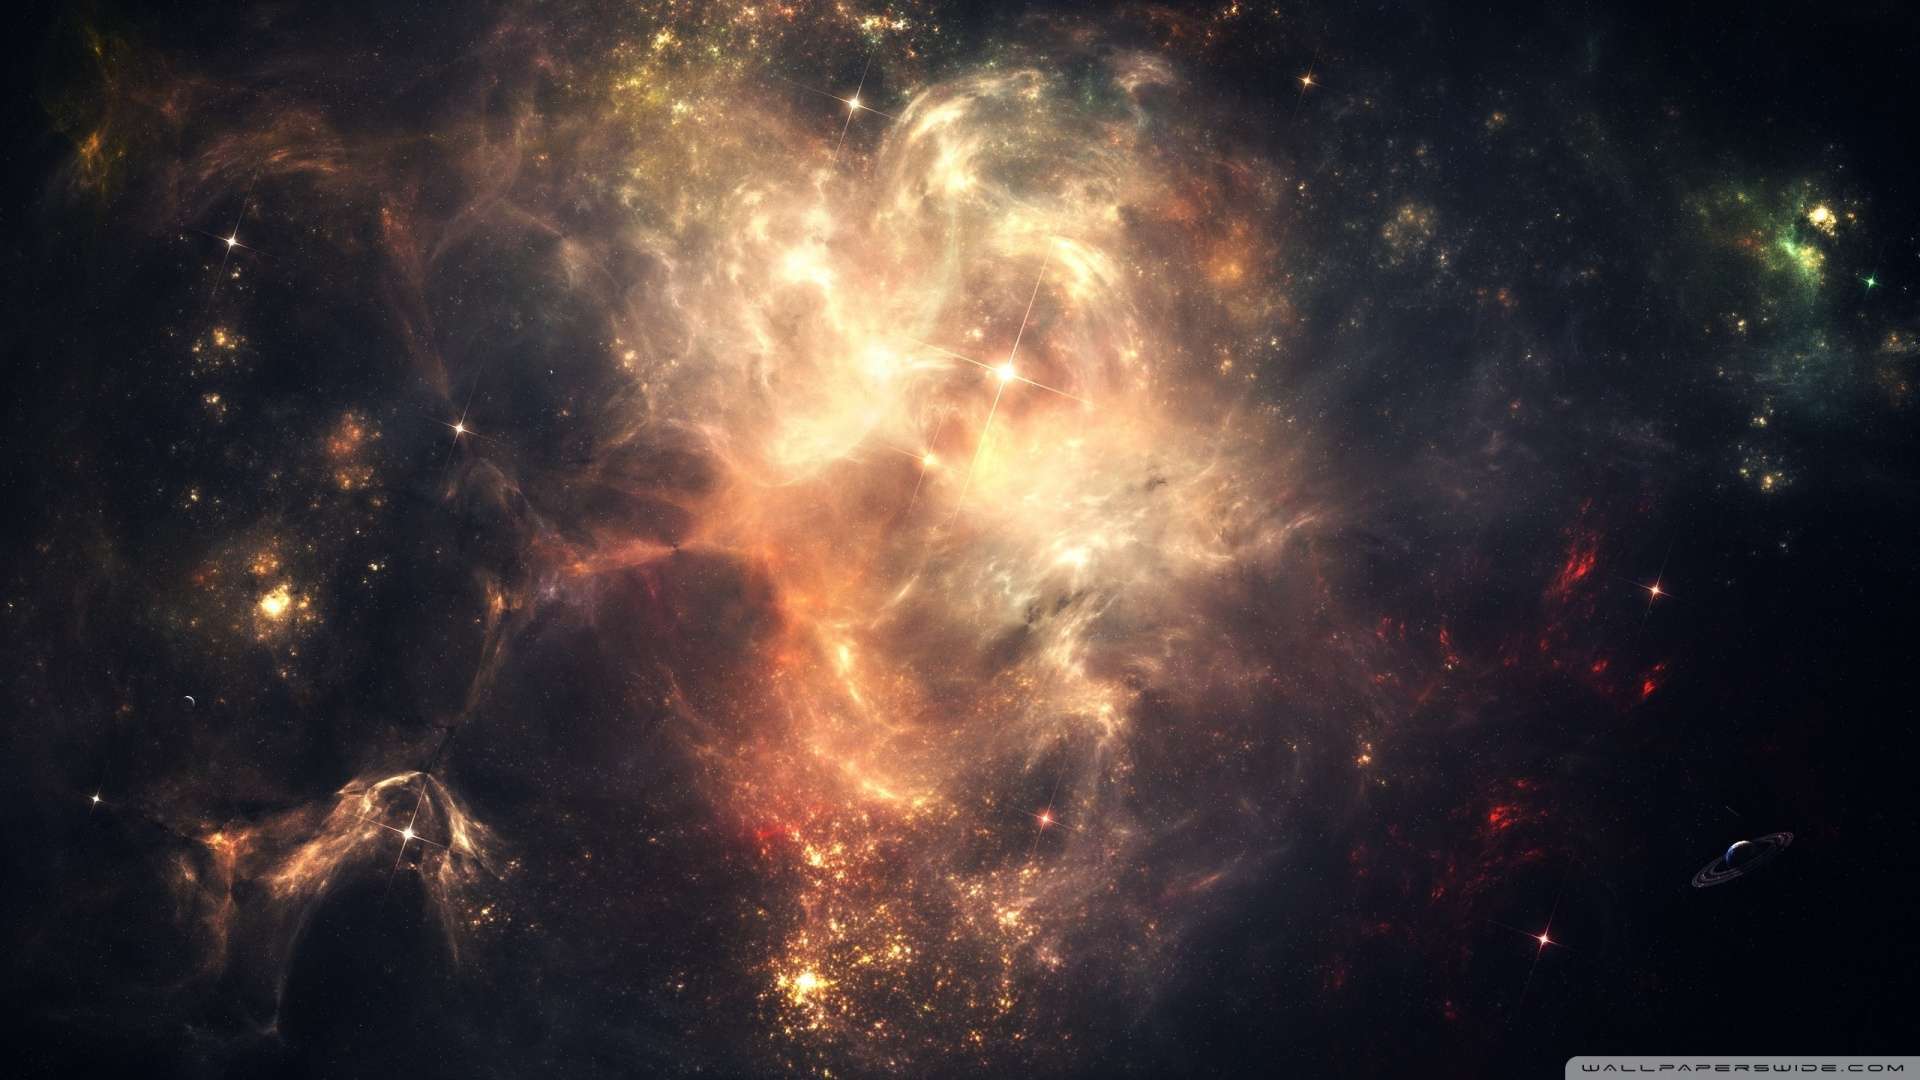 Wallpaper Outer Space Nebulae Wallpaper 1080p HD Upload at February